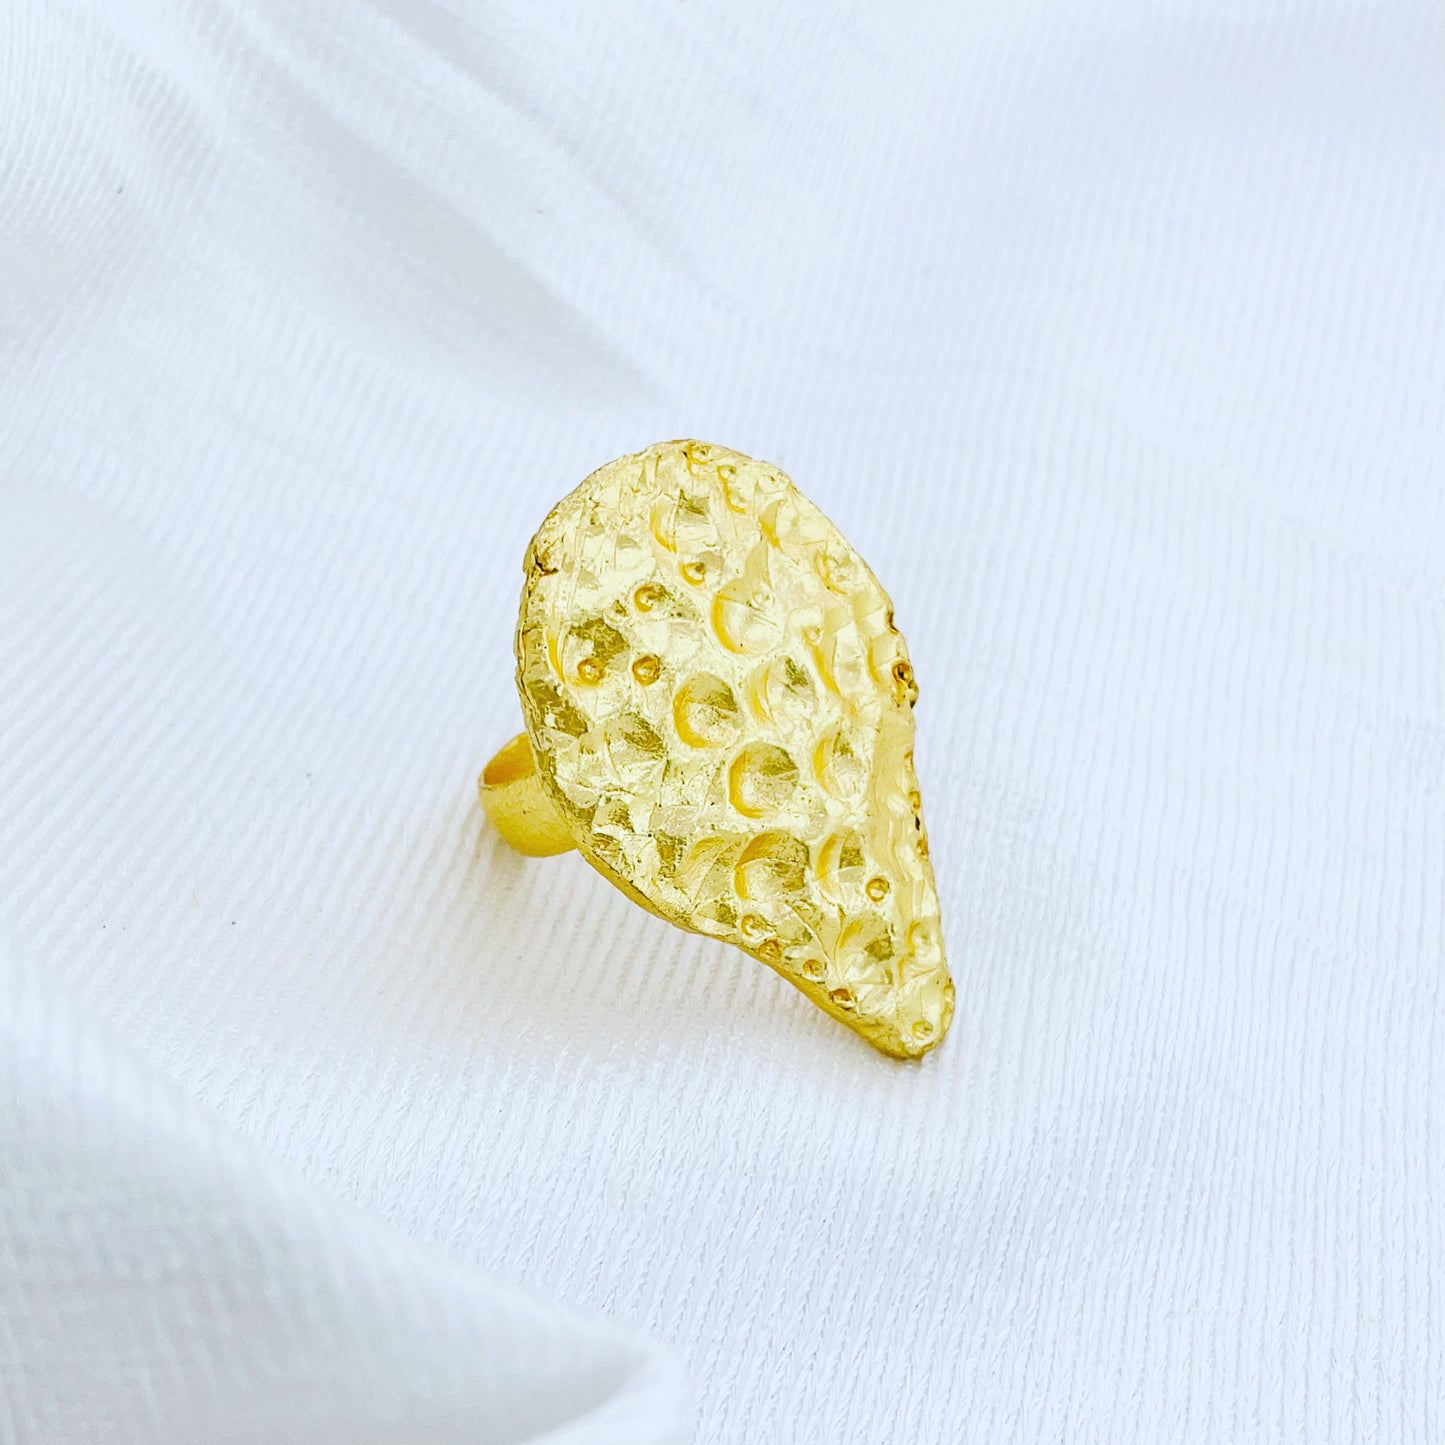 Gold plated uneven hammered form adjustable Handcrafted Ring 